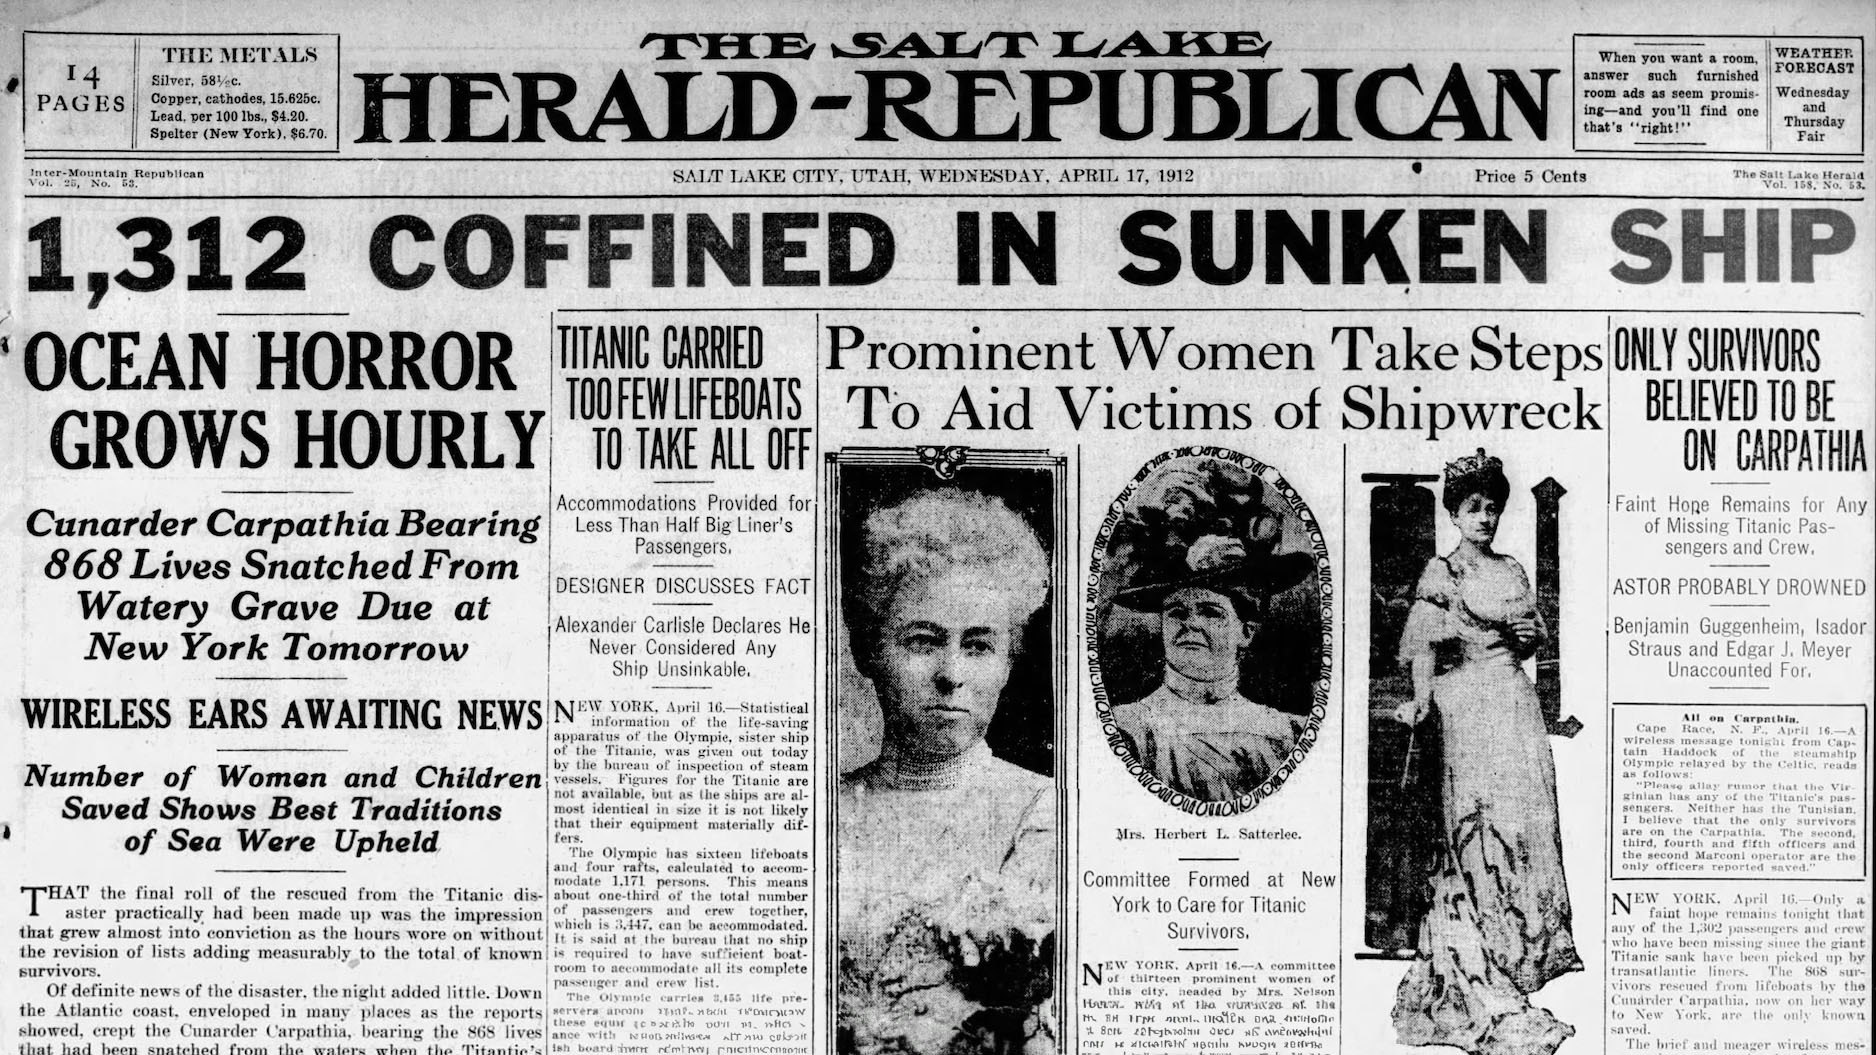 he Salt Lake City Herald-Republican, like hundreds of other newspapers around the nation and world, carried banner headlines about the Titanic sinking.